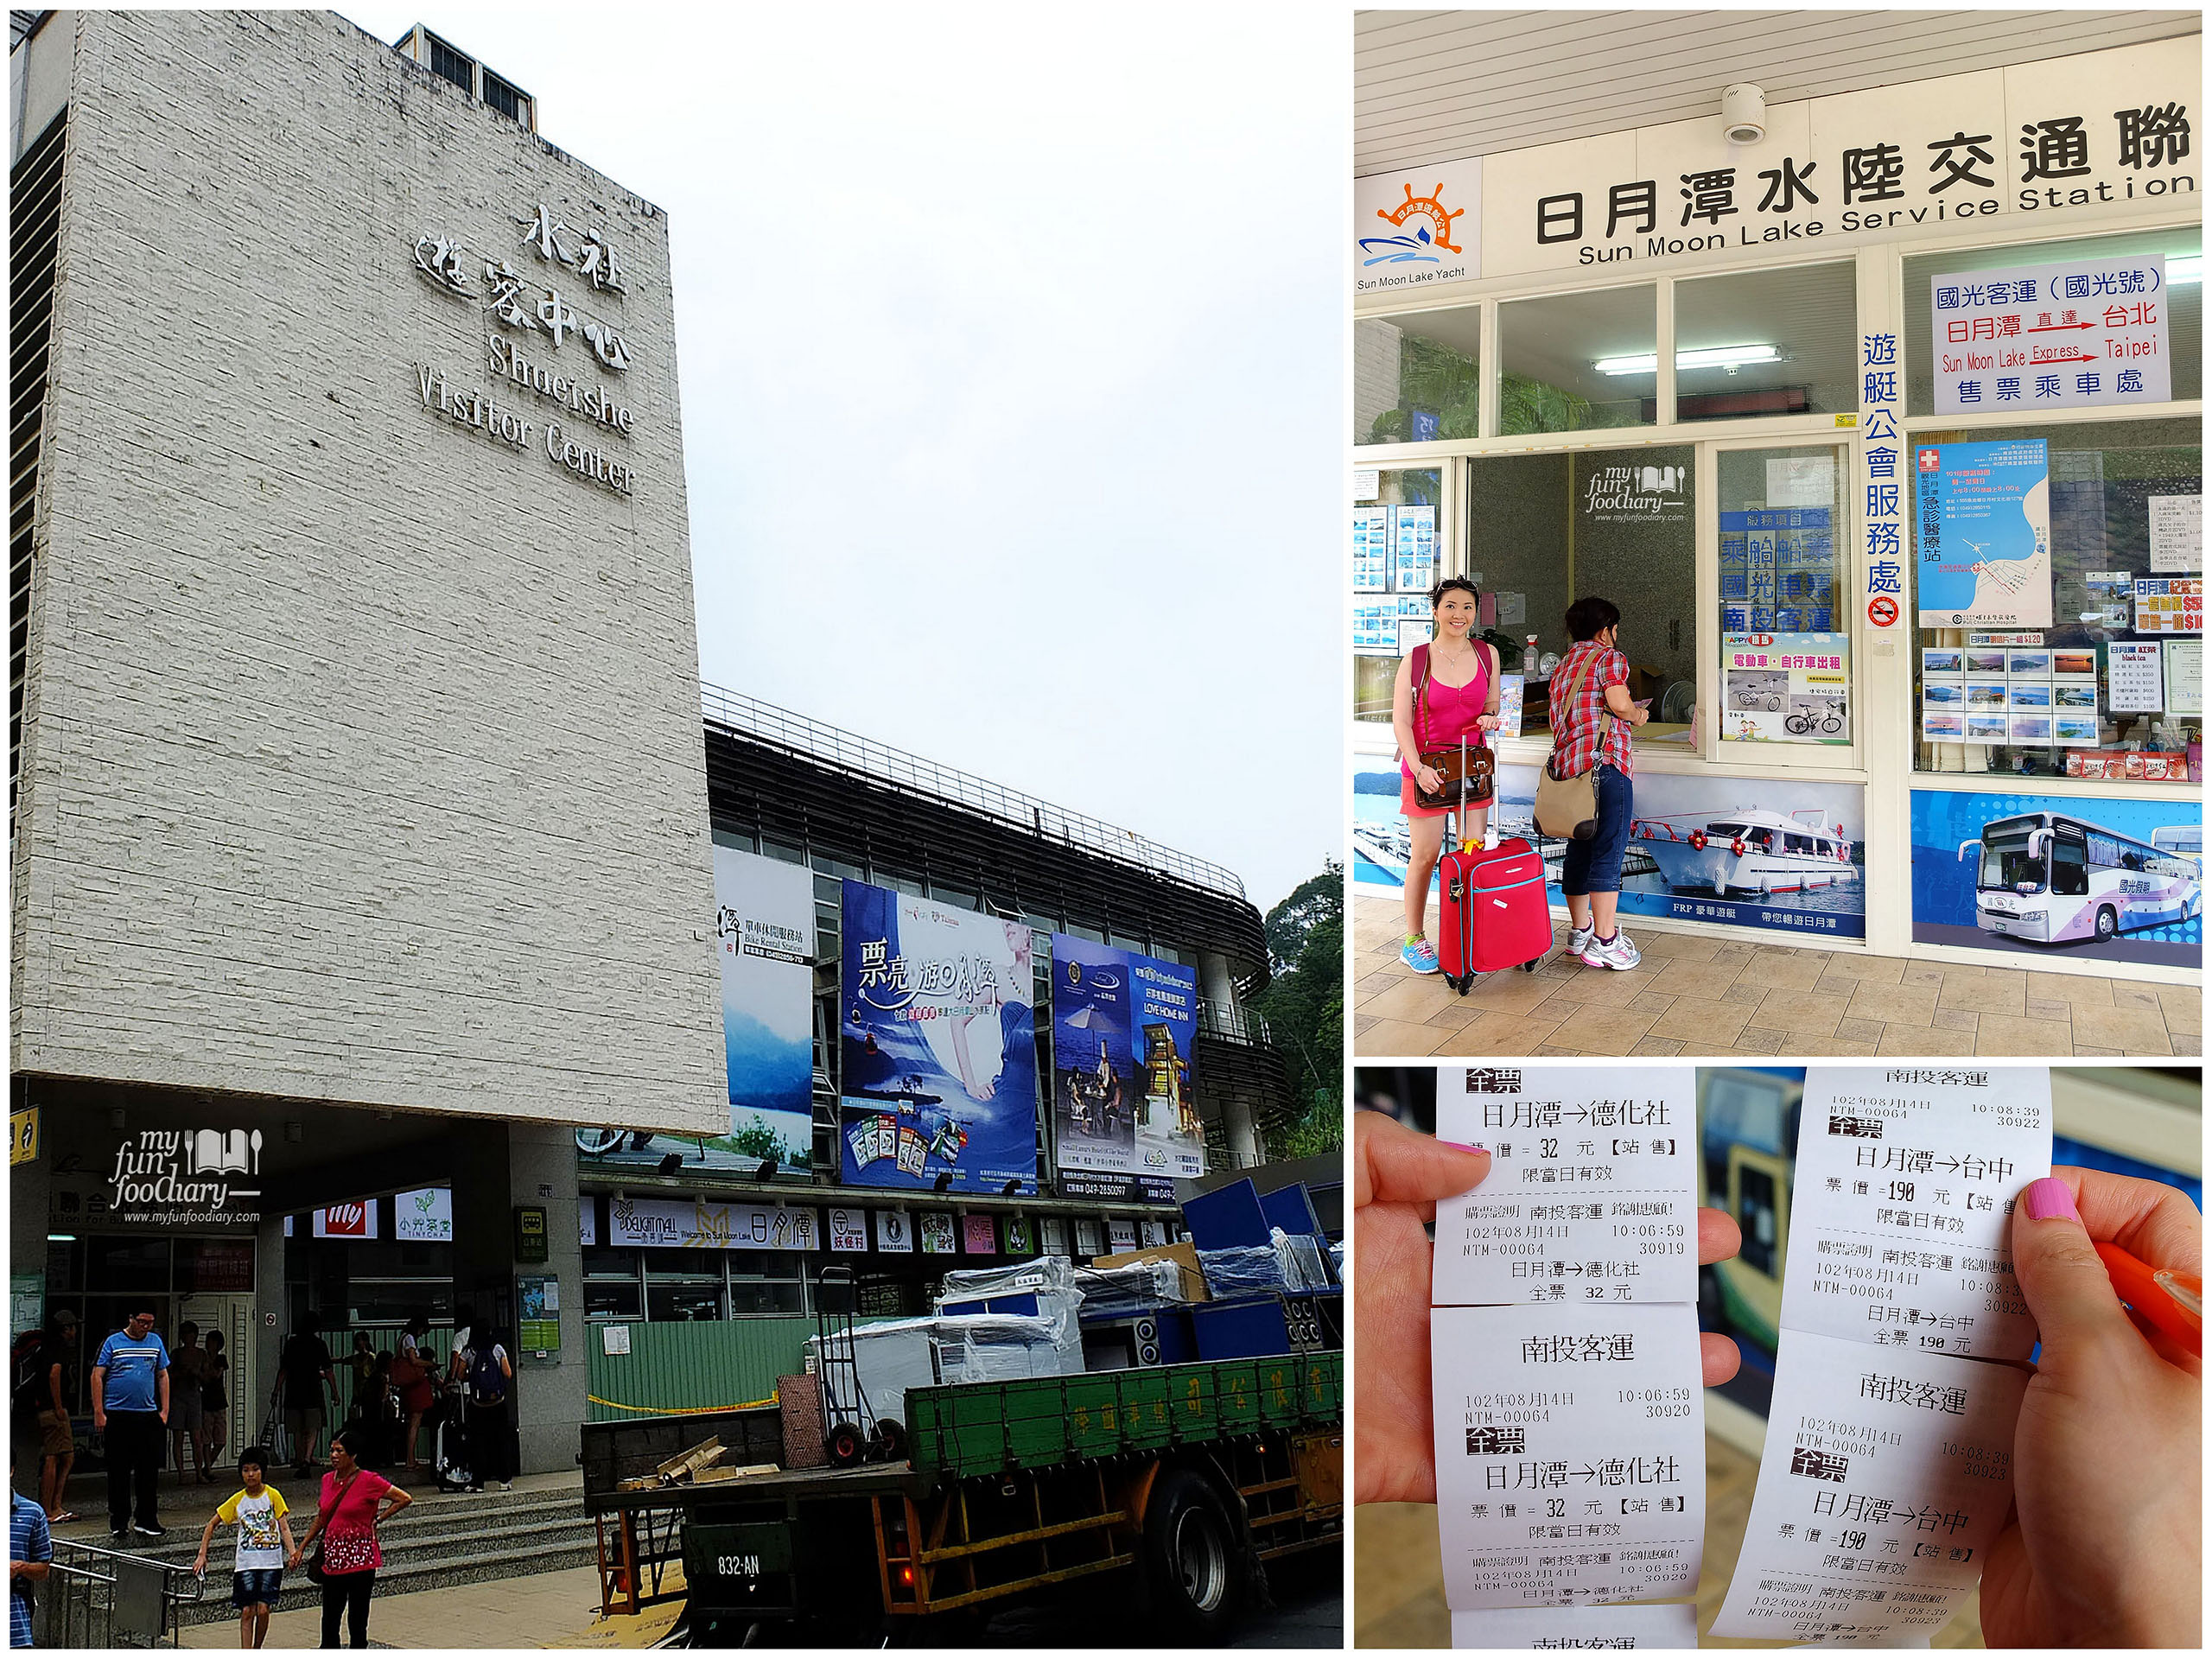 Buying a Bus Ticket to Formosan Aborigin Village - by Myfunfoodiary